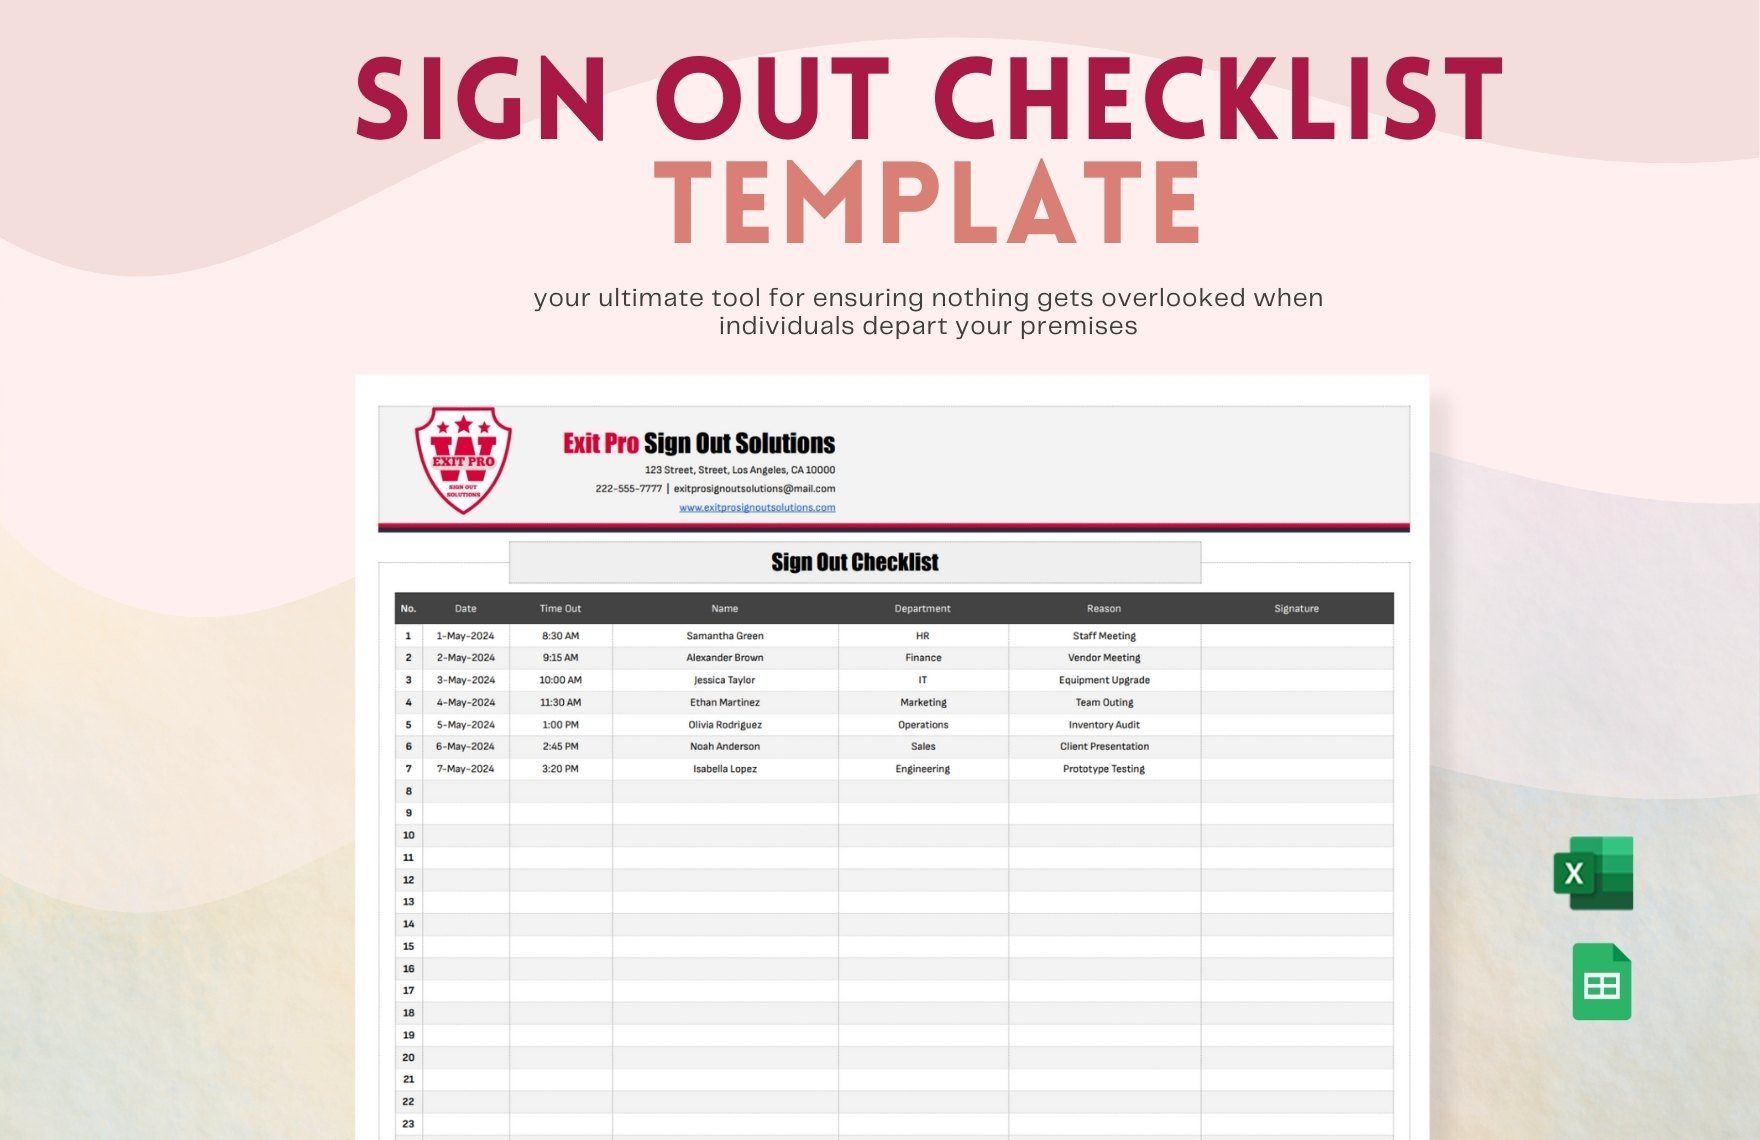 Sign Out Checklist Template in Excel, Google Sheets